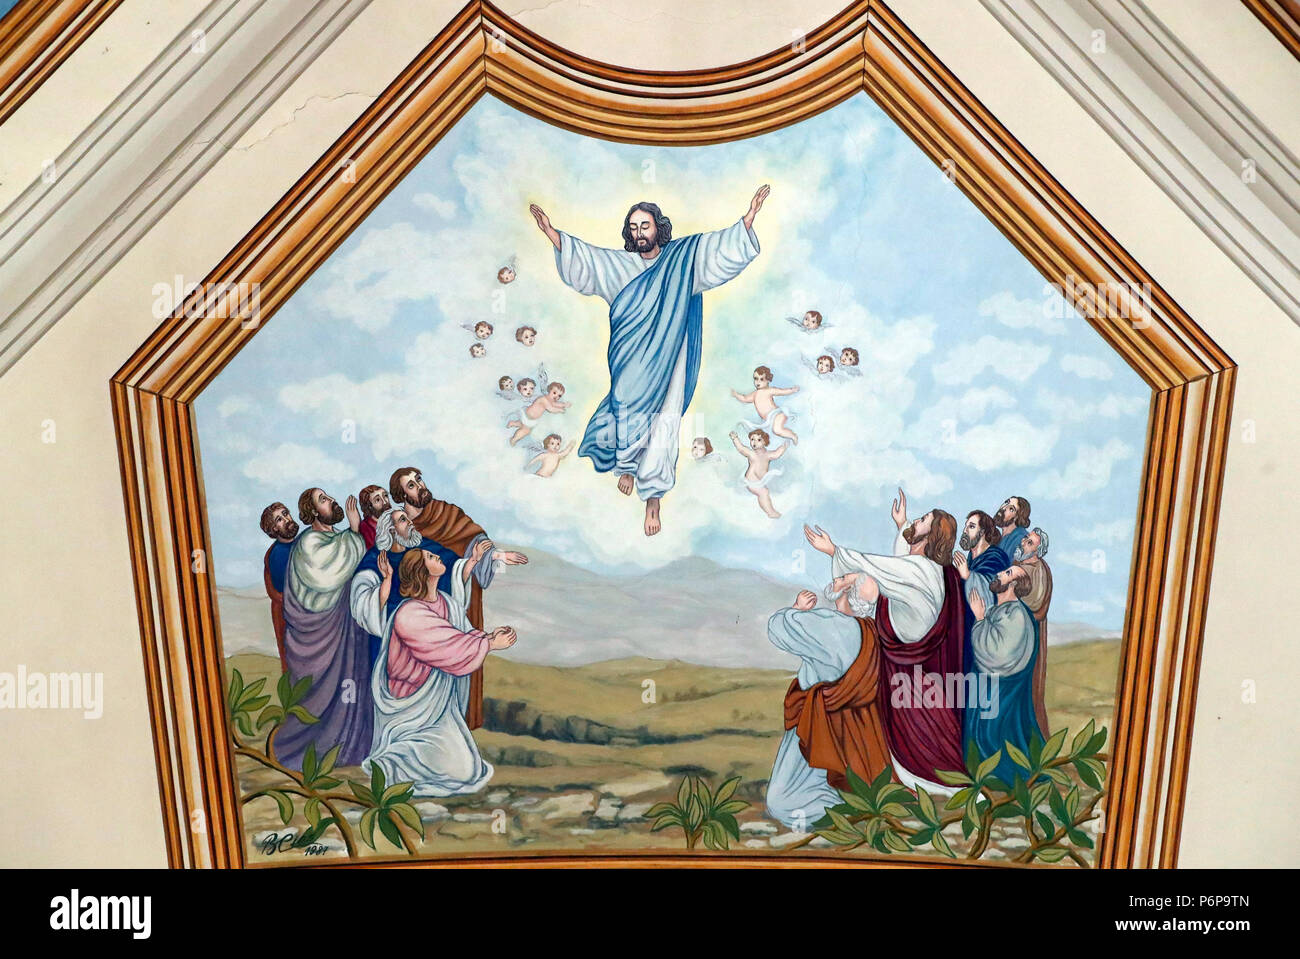 Saint-Andre church. The ascension of Jesus. Wall painting. Stock Photo